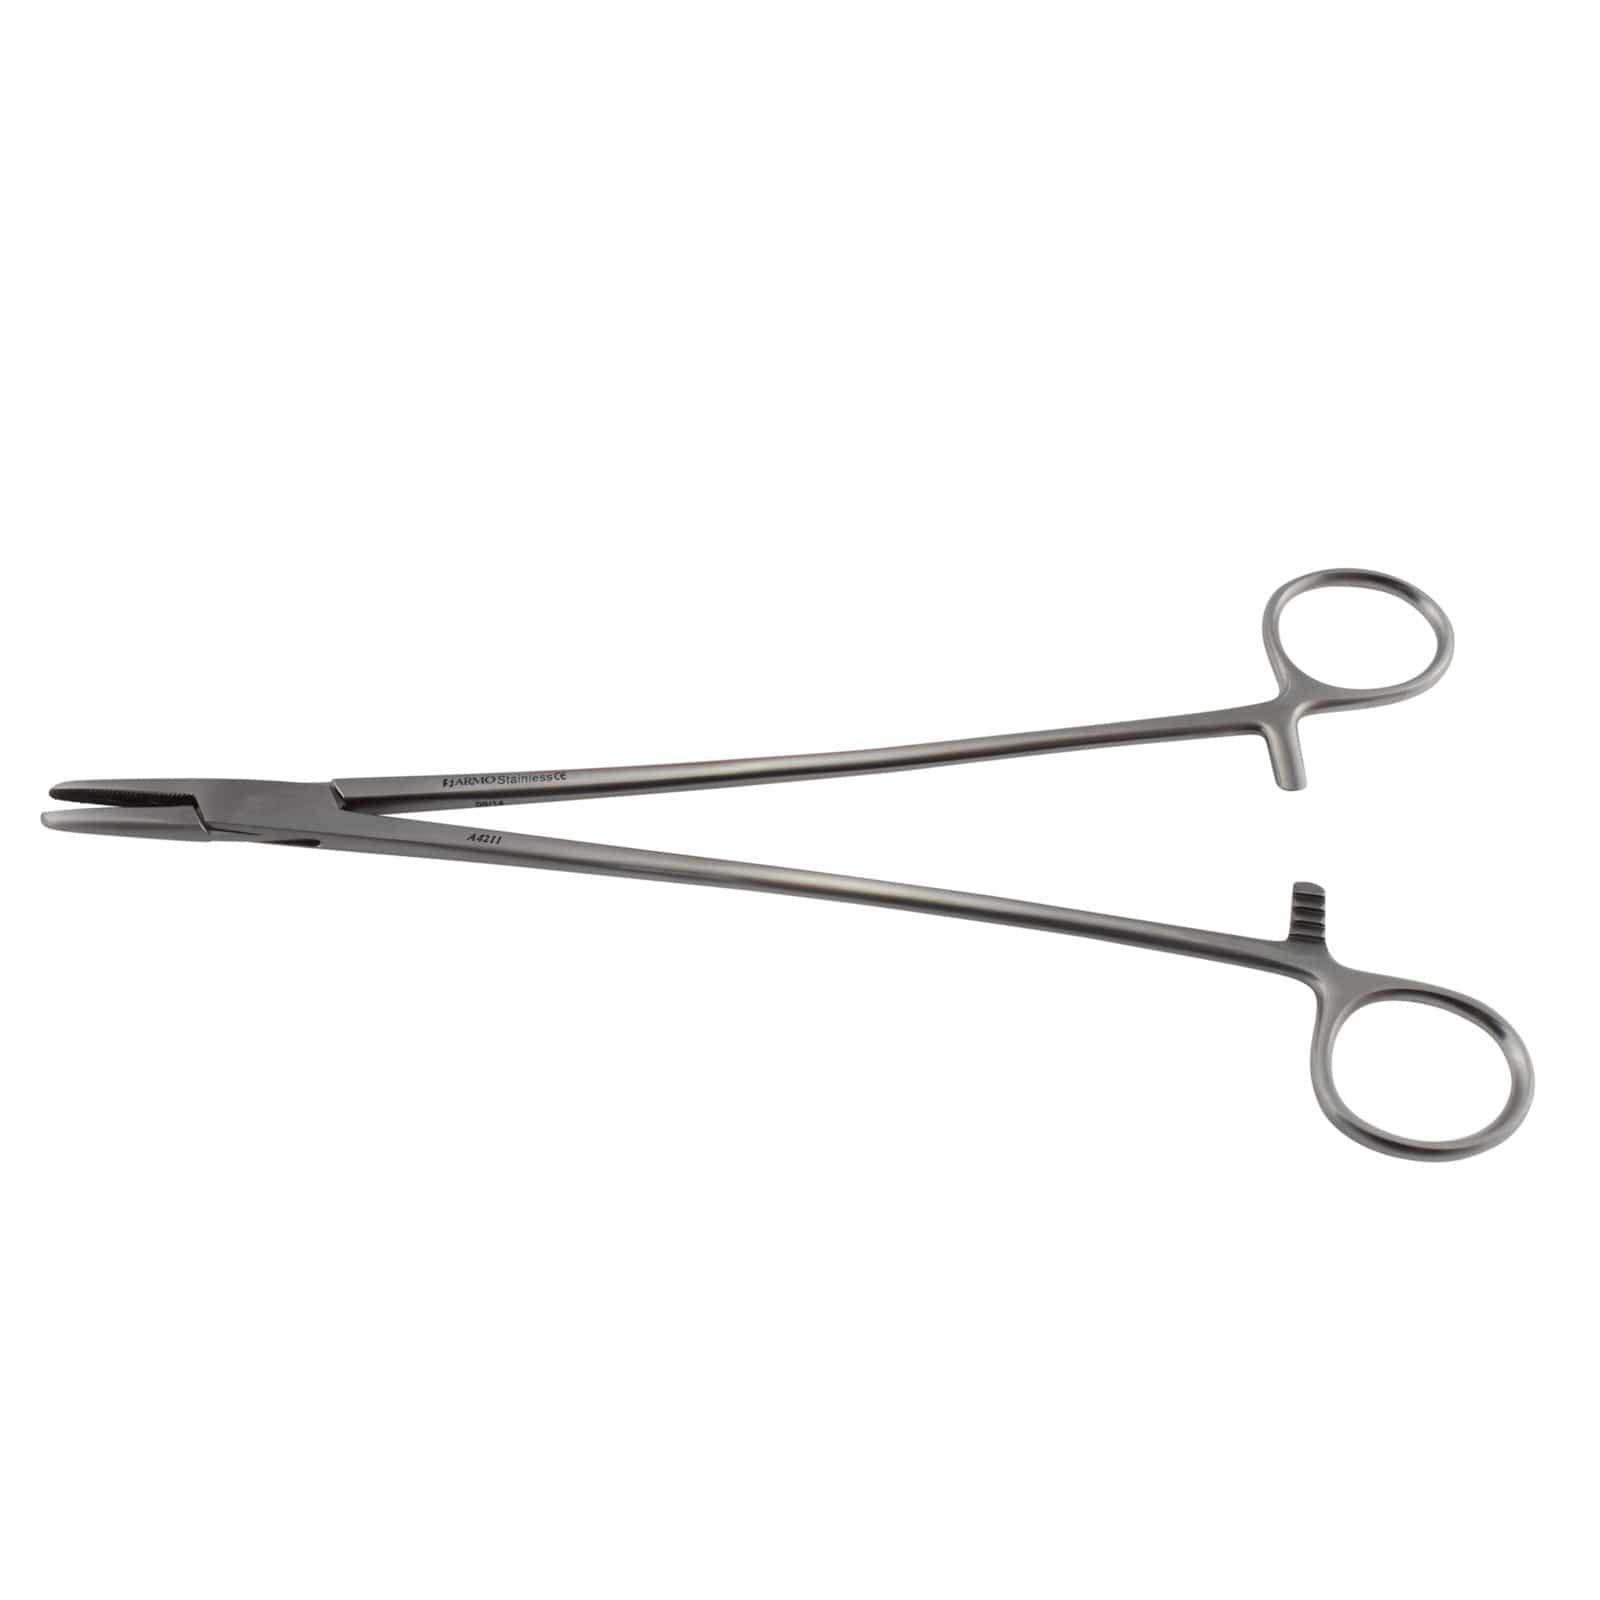 Armo Surgical Instruments 26cm / Right Handed / Standard Armo Mayo Hegar Needle Holder